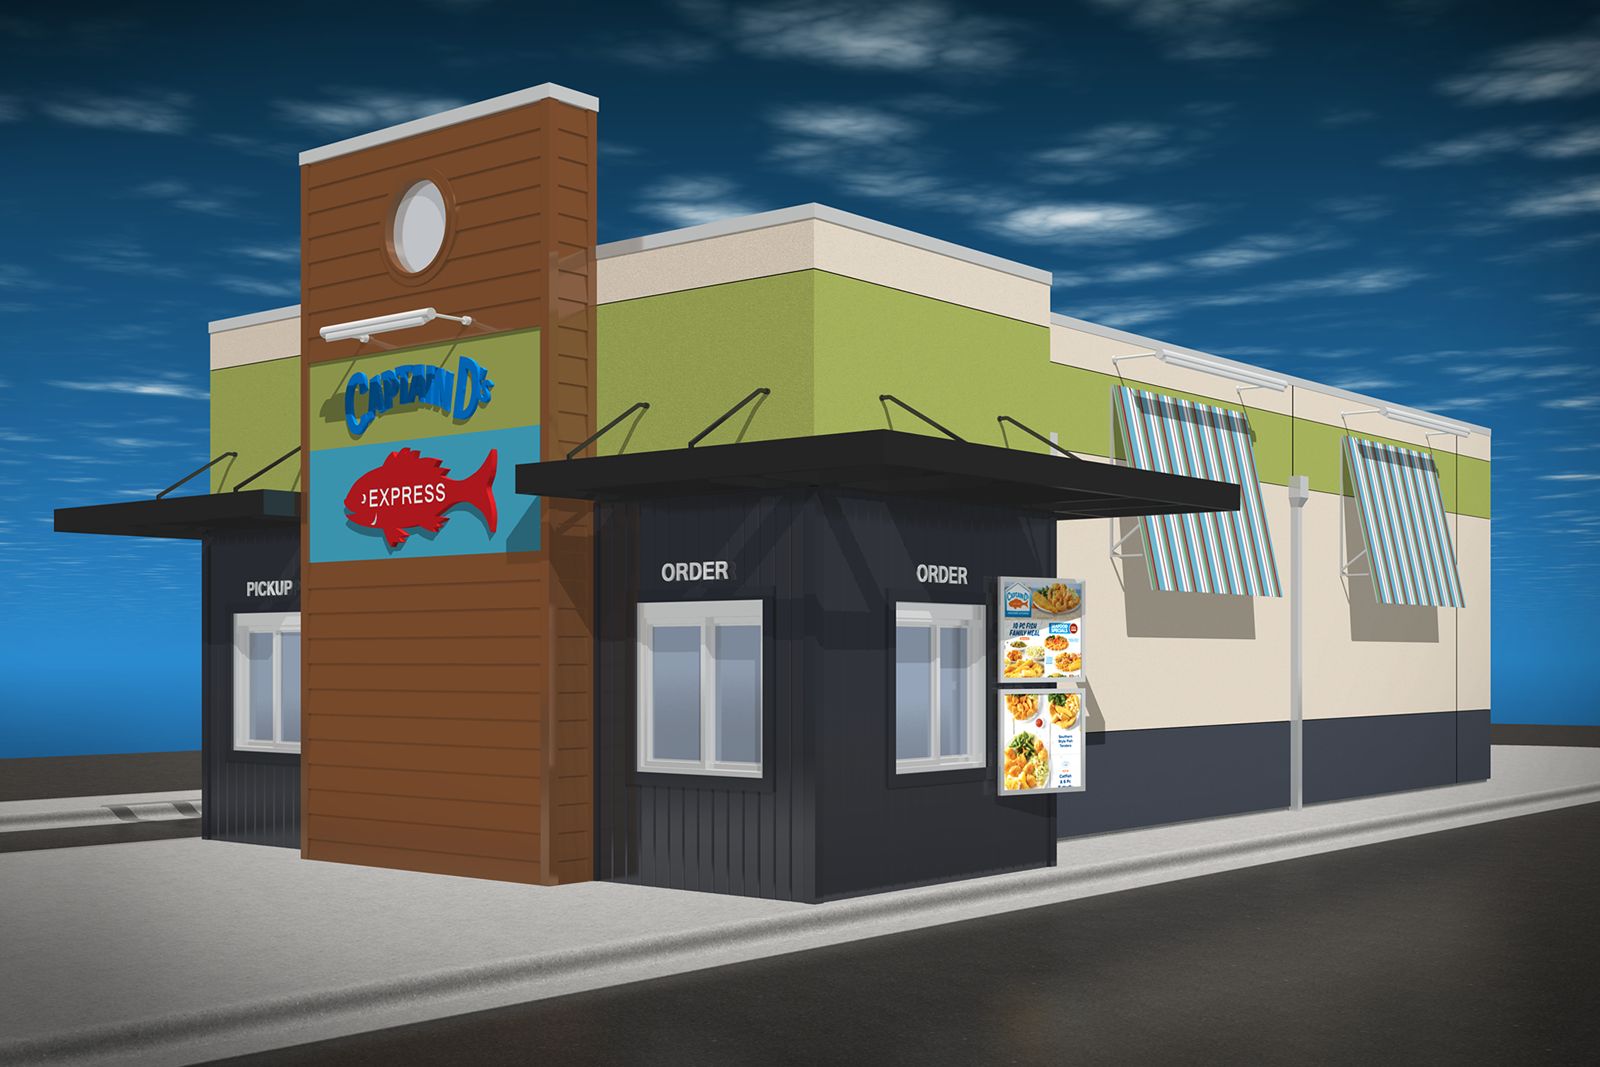 Captain D's Unveils Innovative New 'Express' Restaurant Prototype to Drive Franchise Development in Untapped Markets